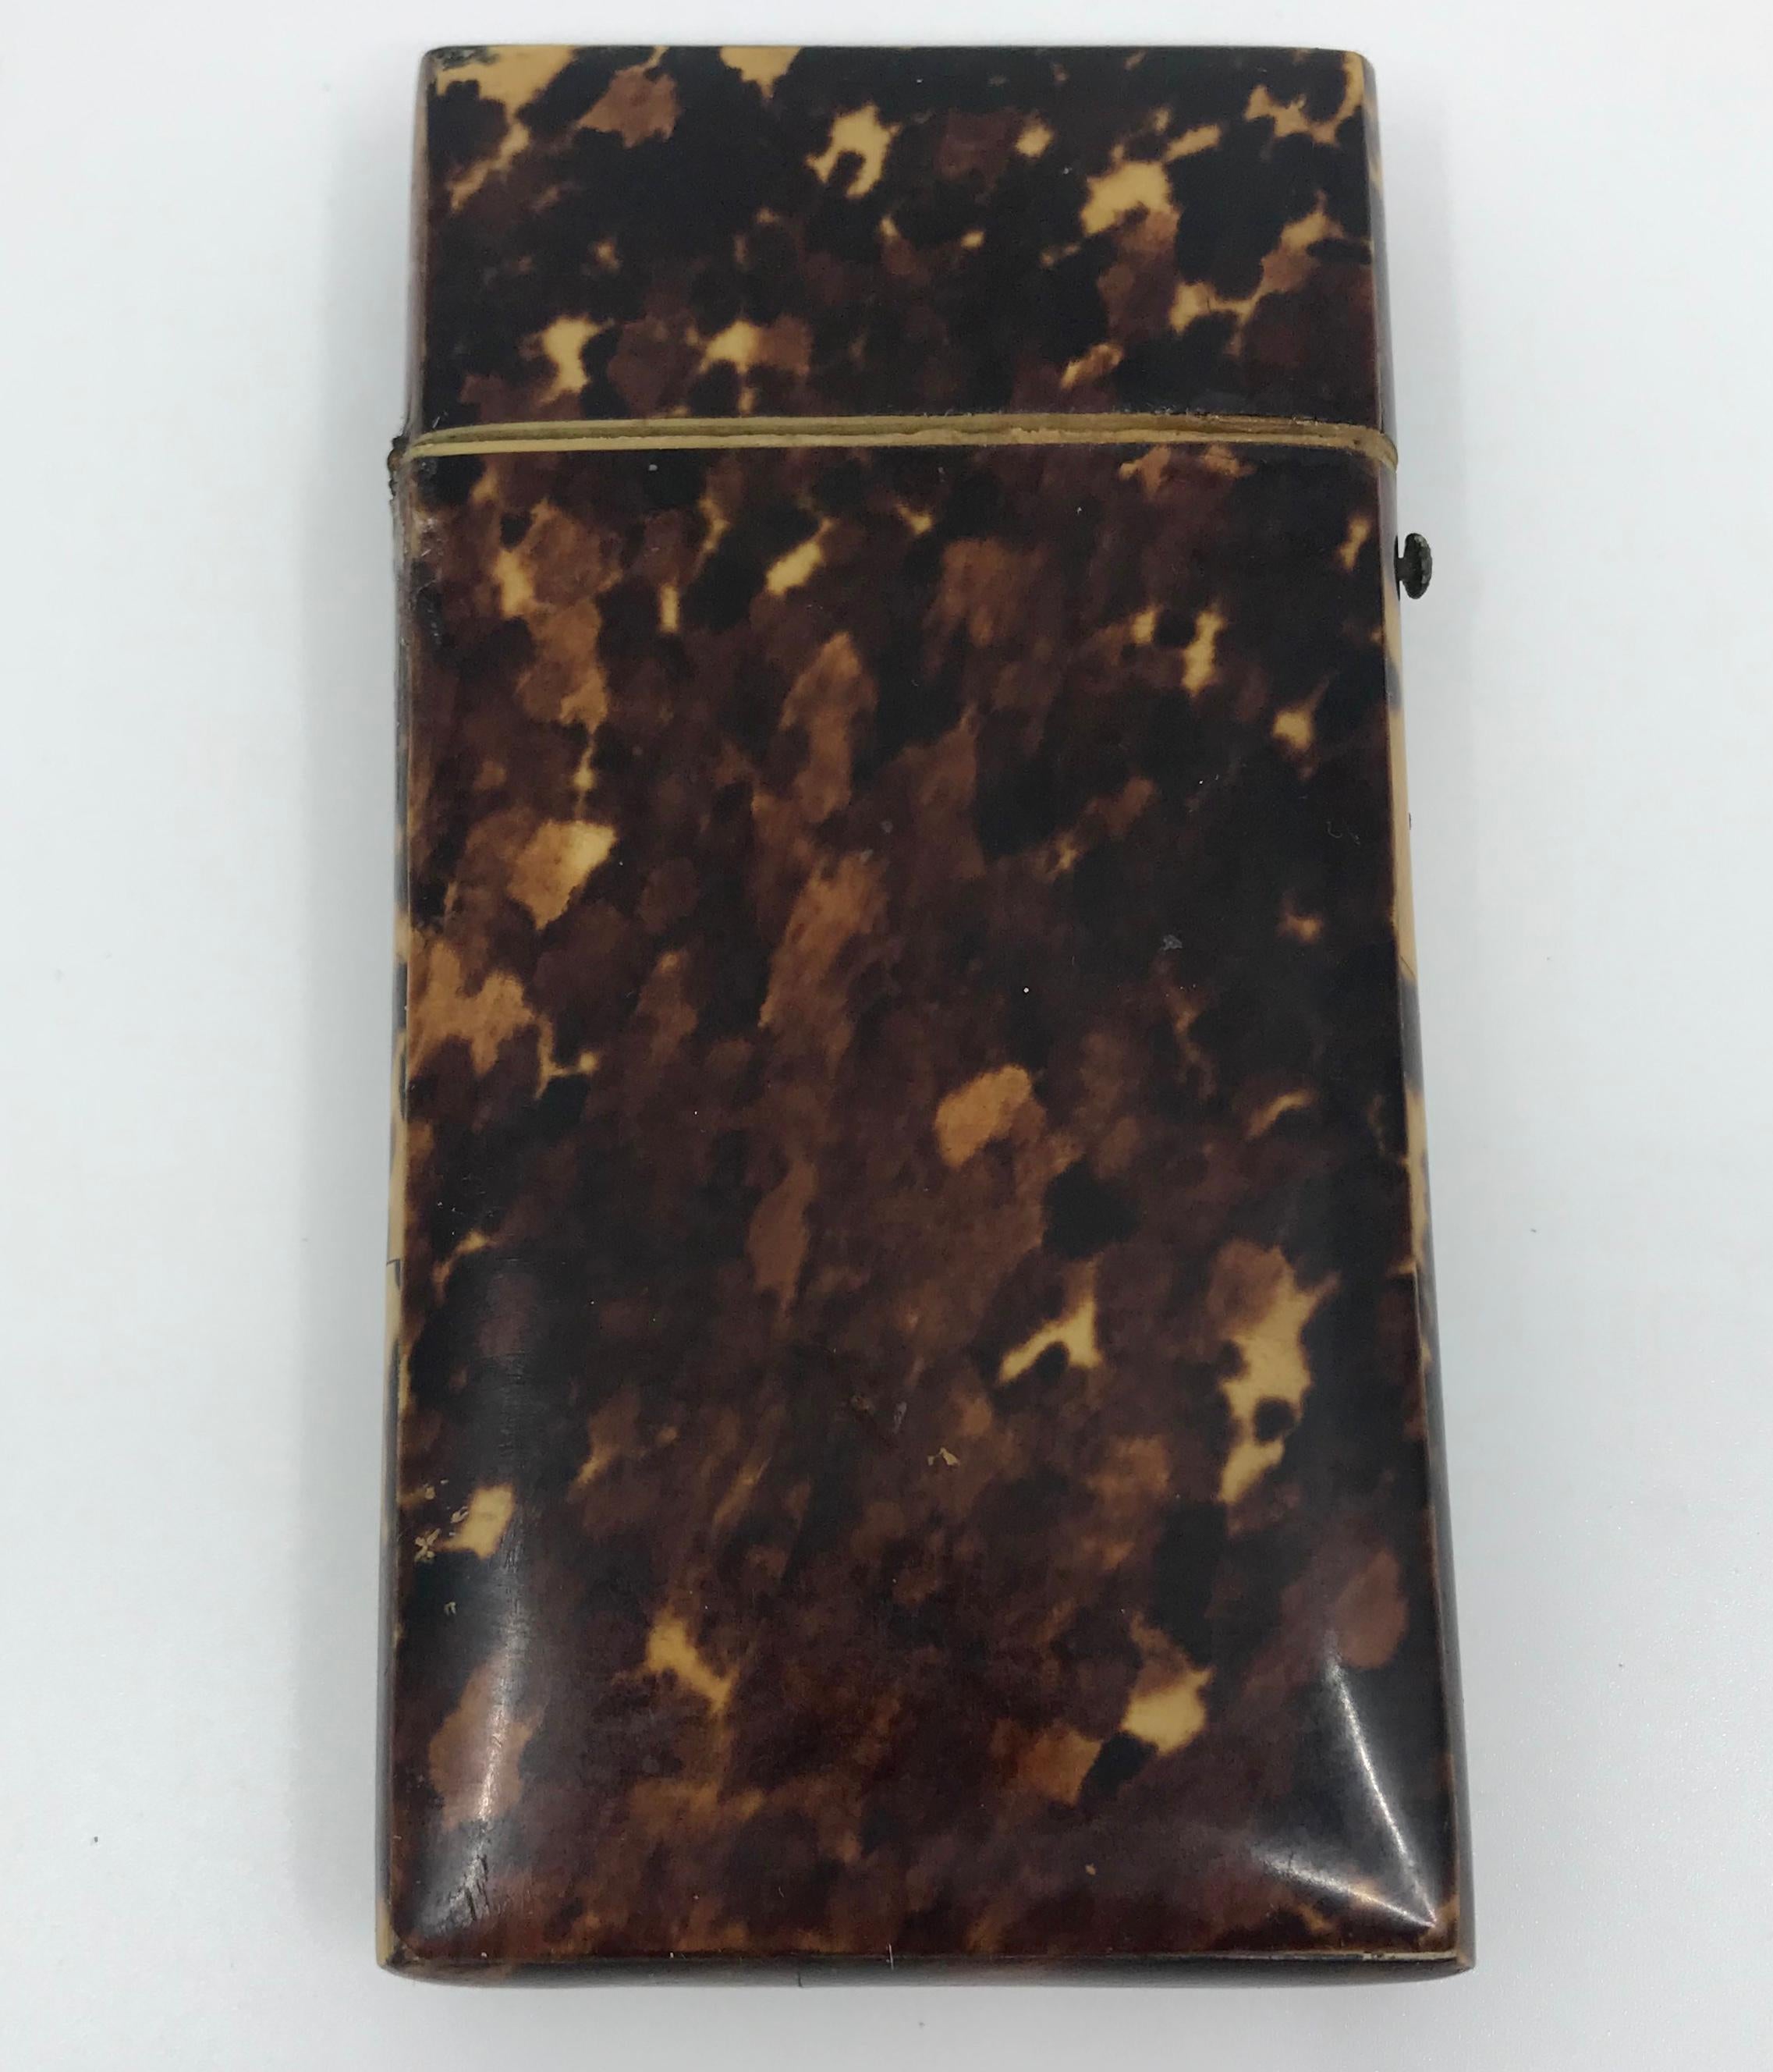 Tortoiseshell cigarette case. Antique tortoiseshell covered cigarette case with removable lid. Very richly figured tortoiseshell decorative box in shades of caramel and mahogany for display or to add to a collection. In good condition; see photos